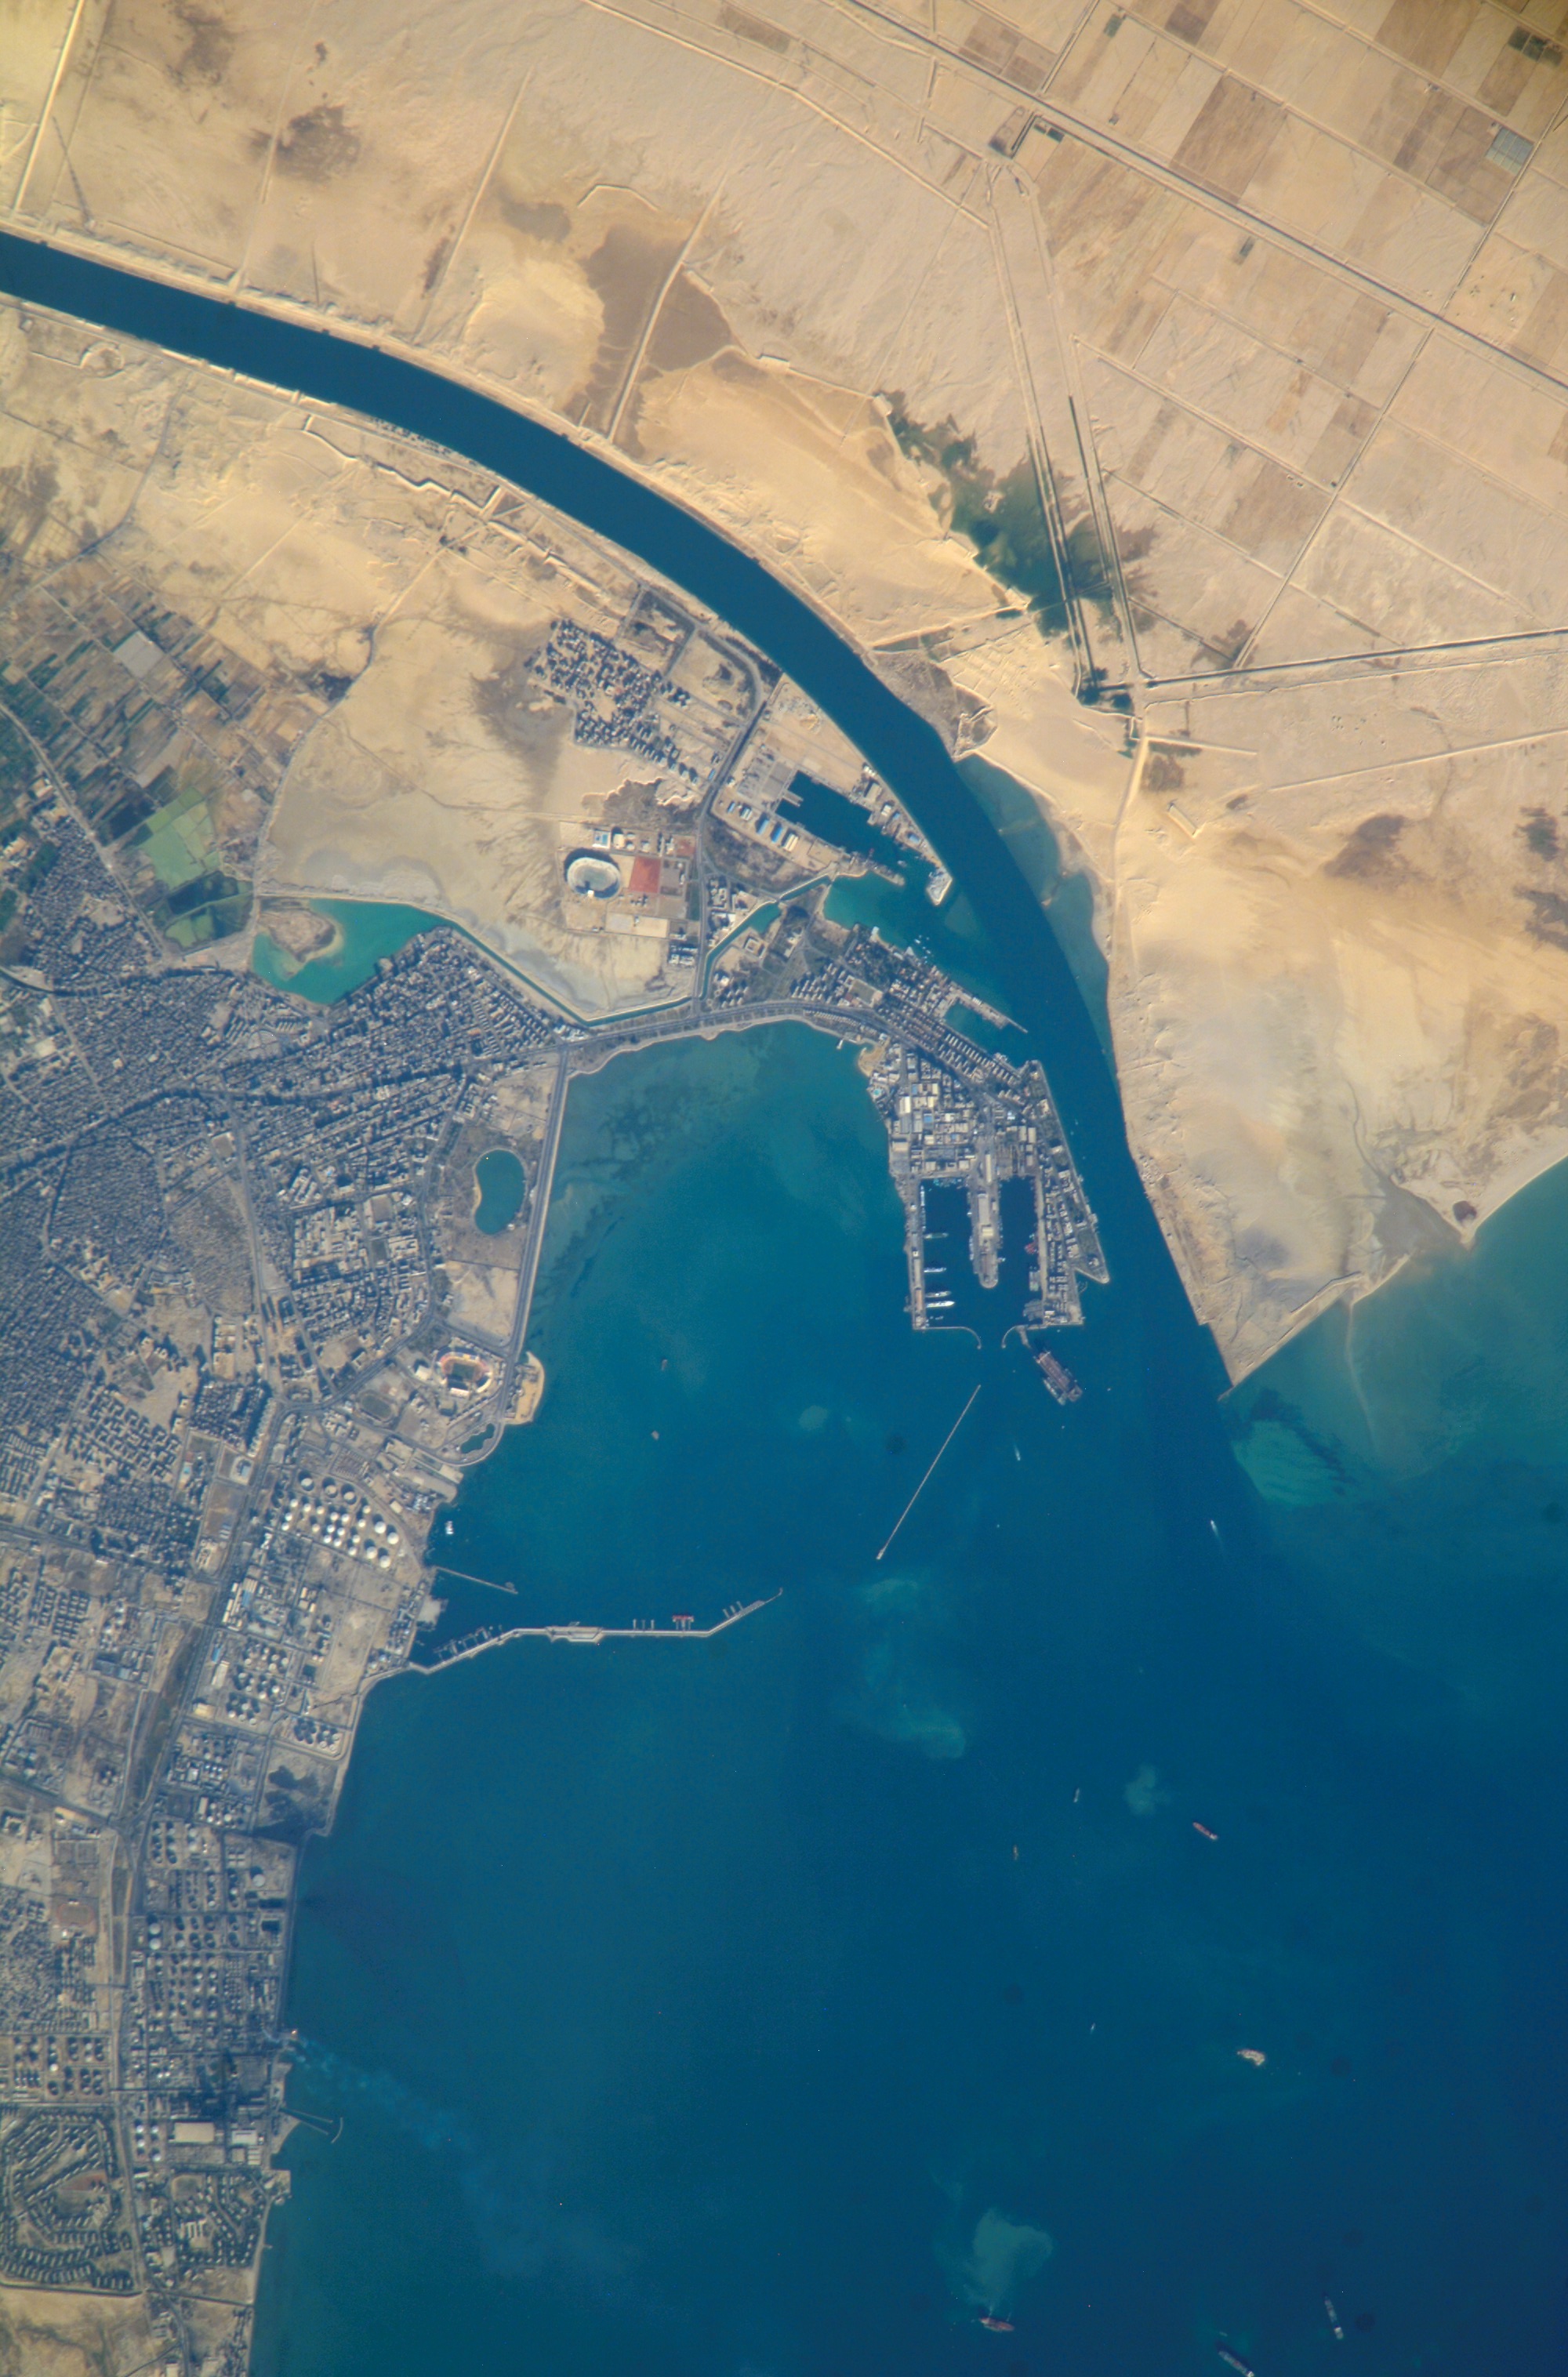 Egypt's Suez Canal economic zone, Abu Dhabi ports partner to develop projects within the zone - statement